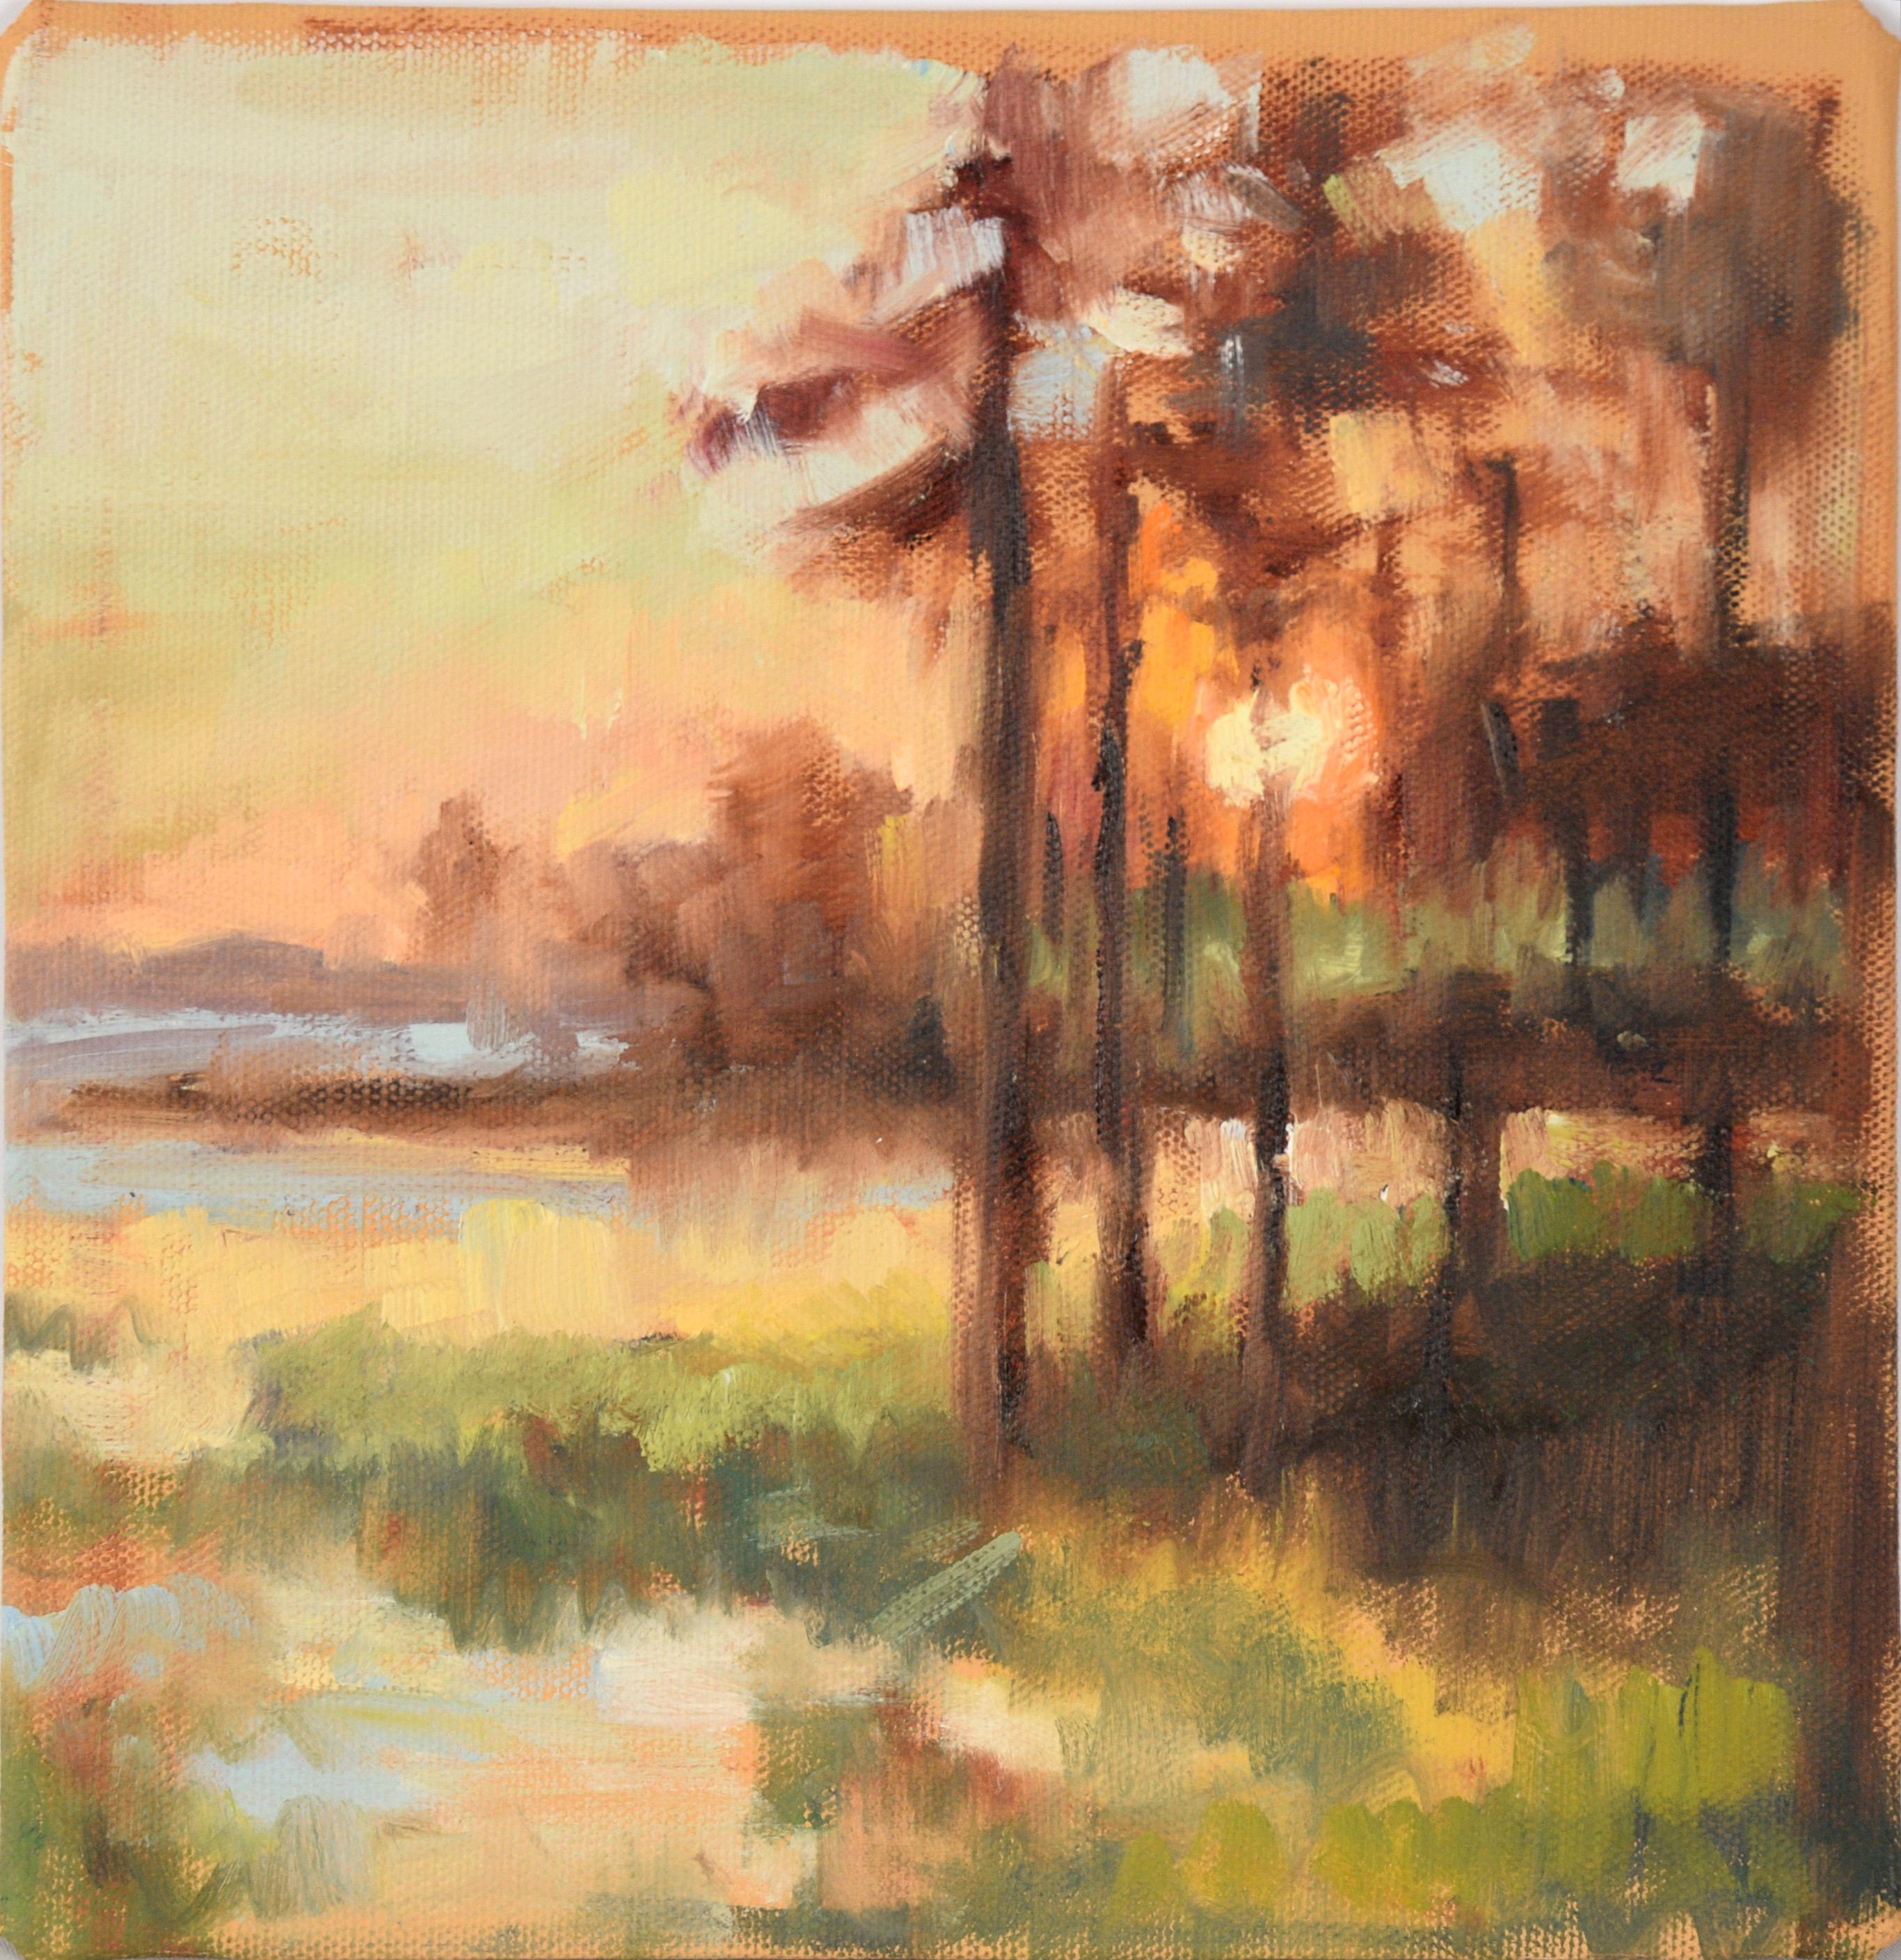 Unknown Landscape Painting - Sunset Through the Trees - Landscape in Oil on Canvas